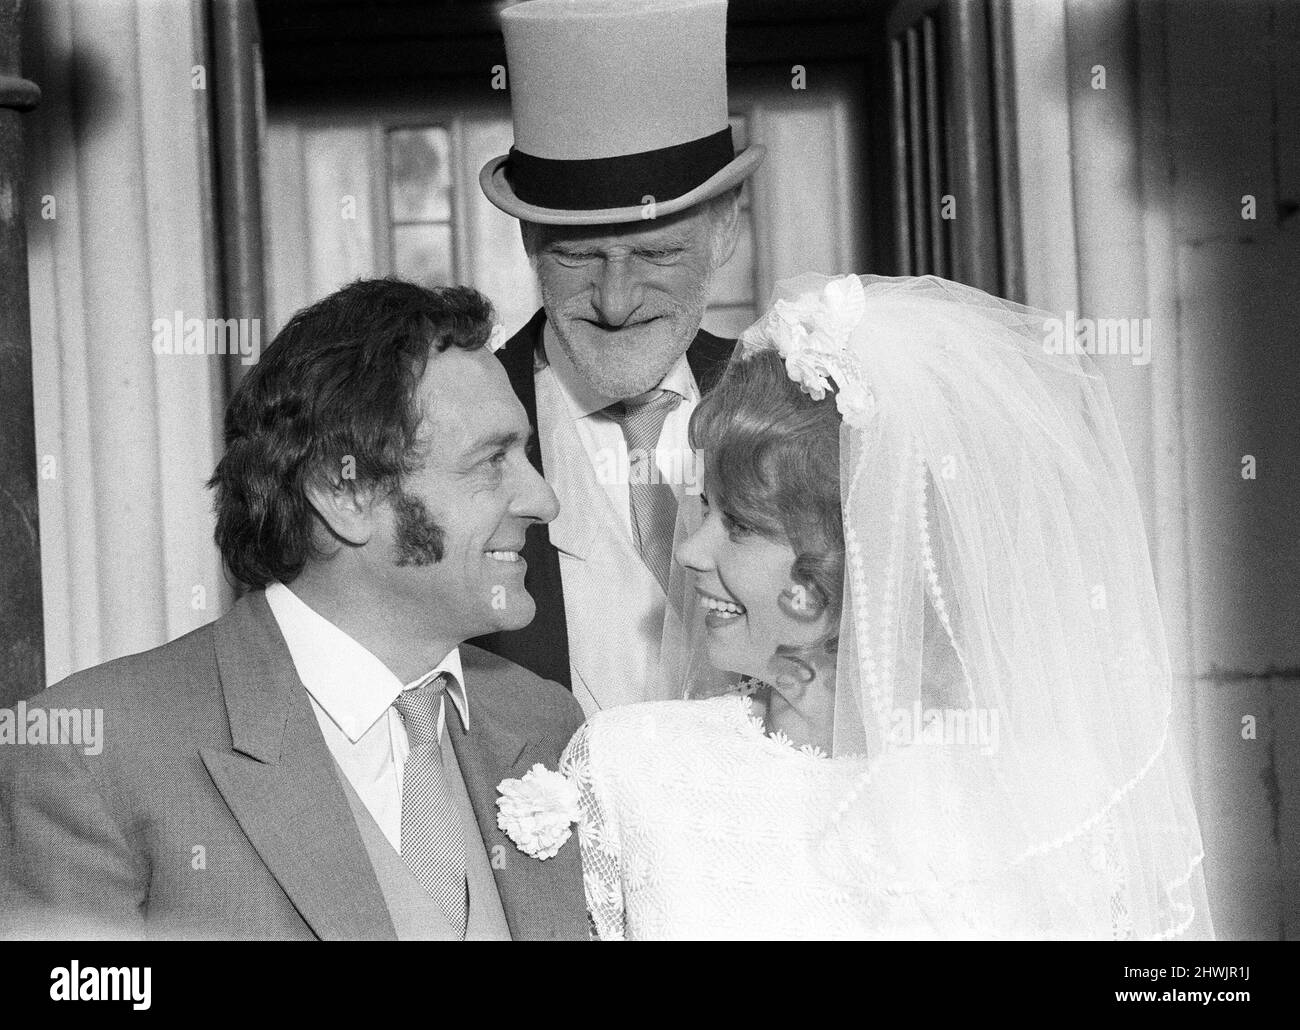 Steptoe and Son, film released 1972, starring Wildred Brambell as Albert Steptoe, Harry H Corbett as his son Harold Steptoe, and Carolyn Seymour as wife Zita, pictured on location at St John's Church, Ladbroke Grove, London, Thursday 28th October 1971. Stock Photo